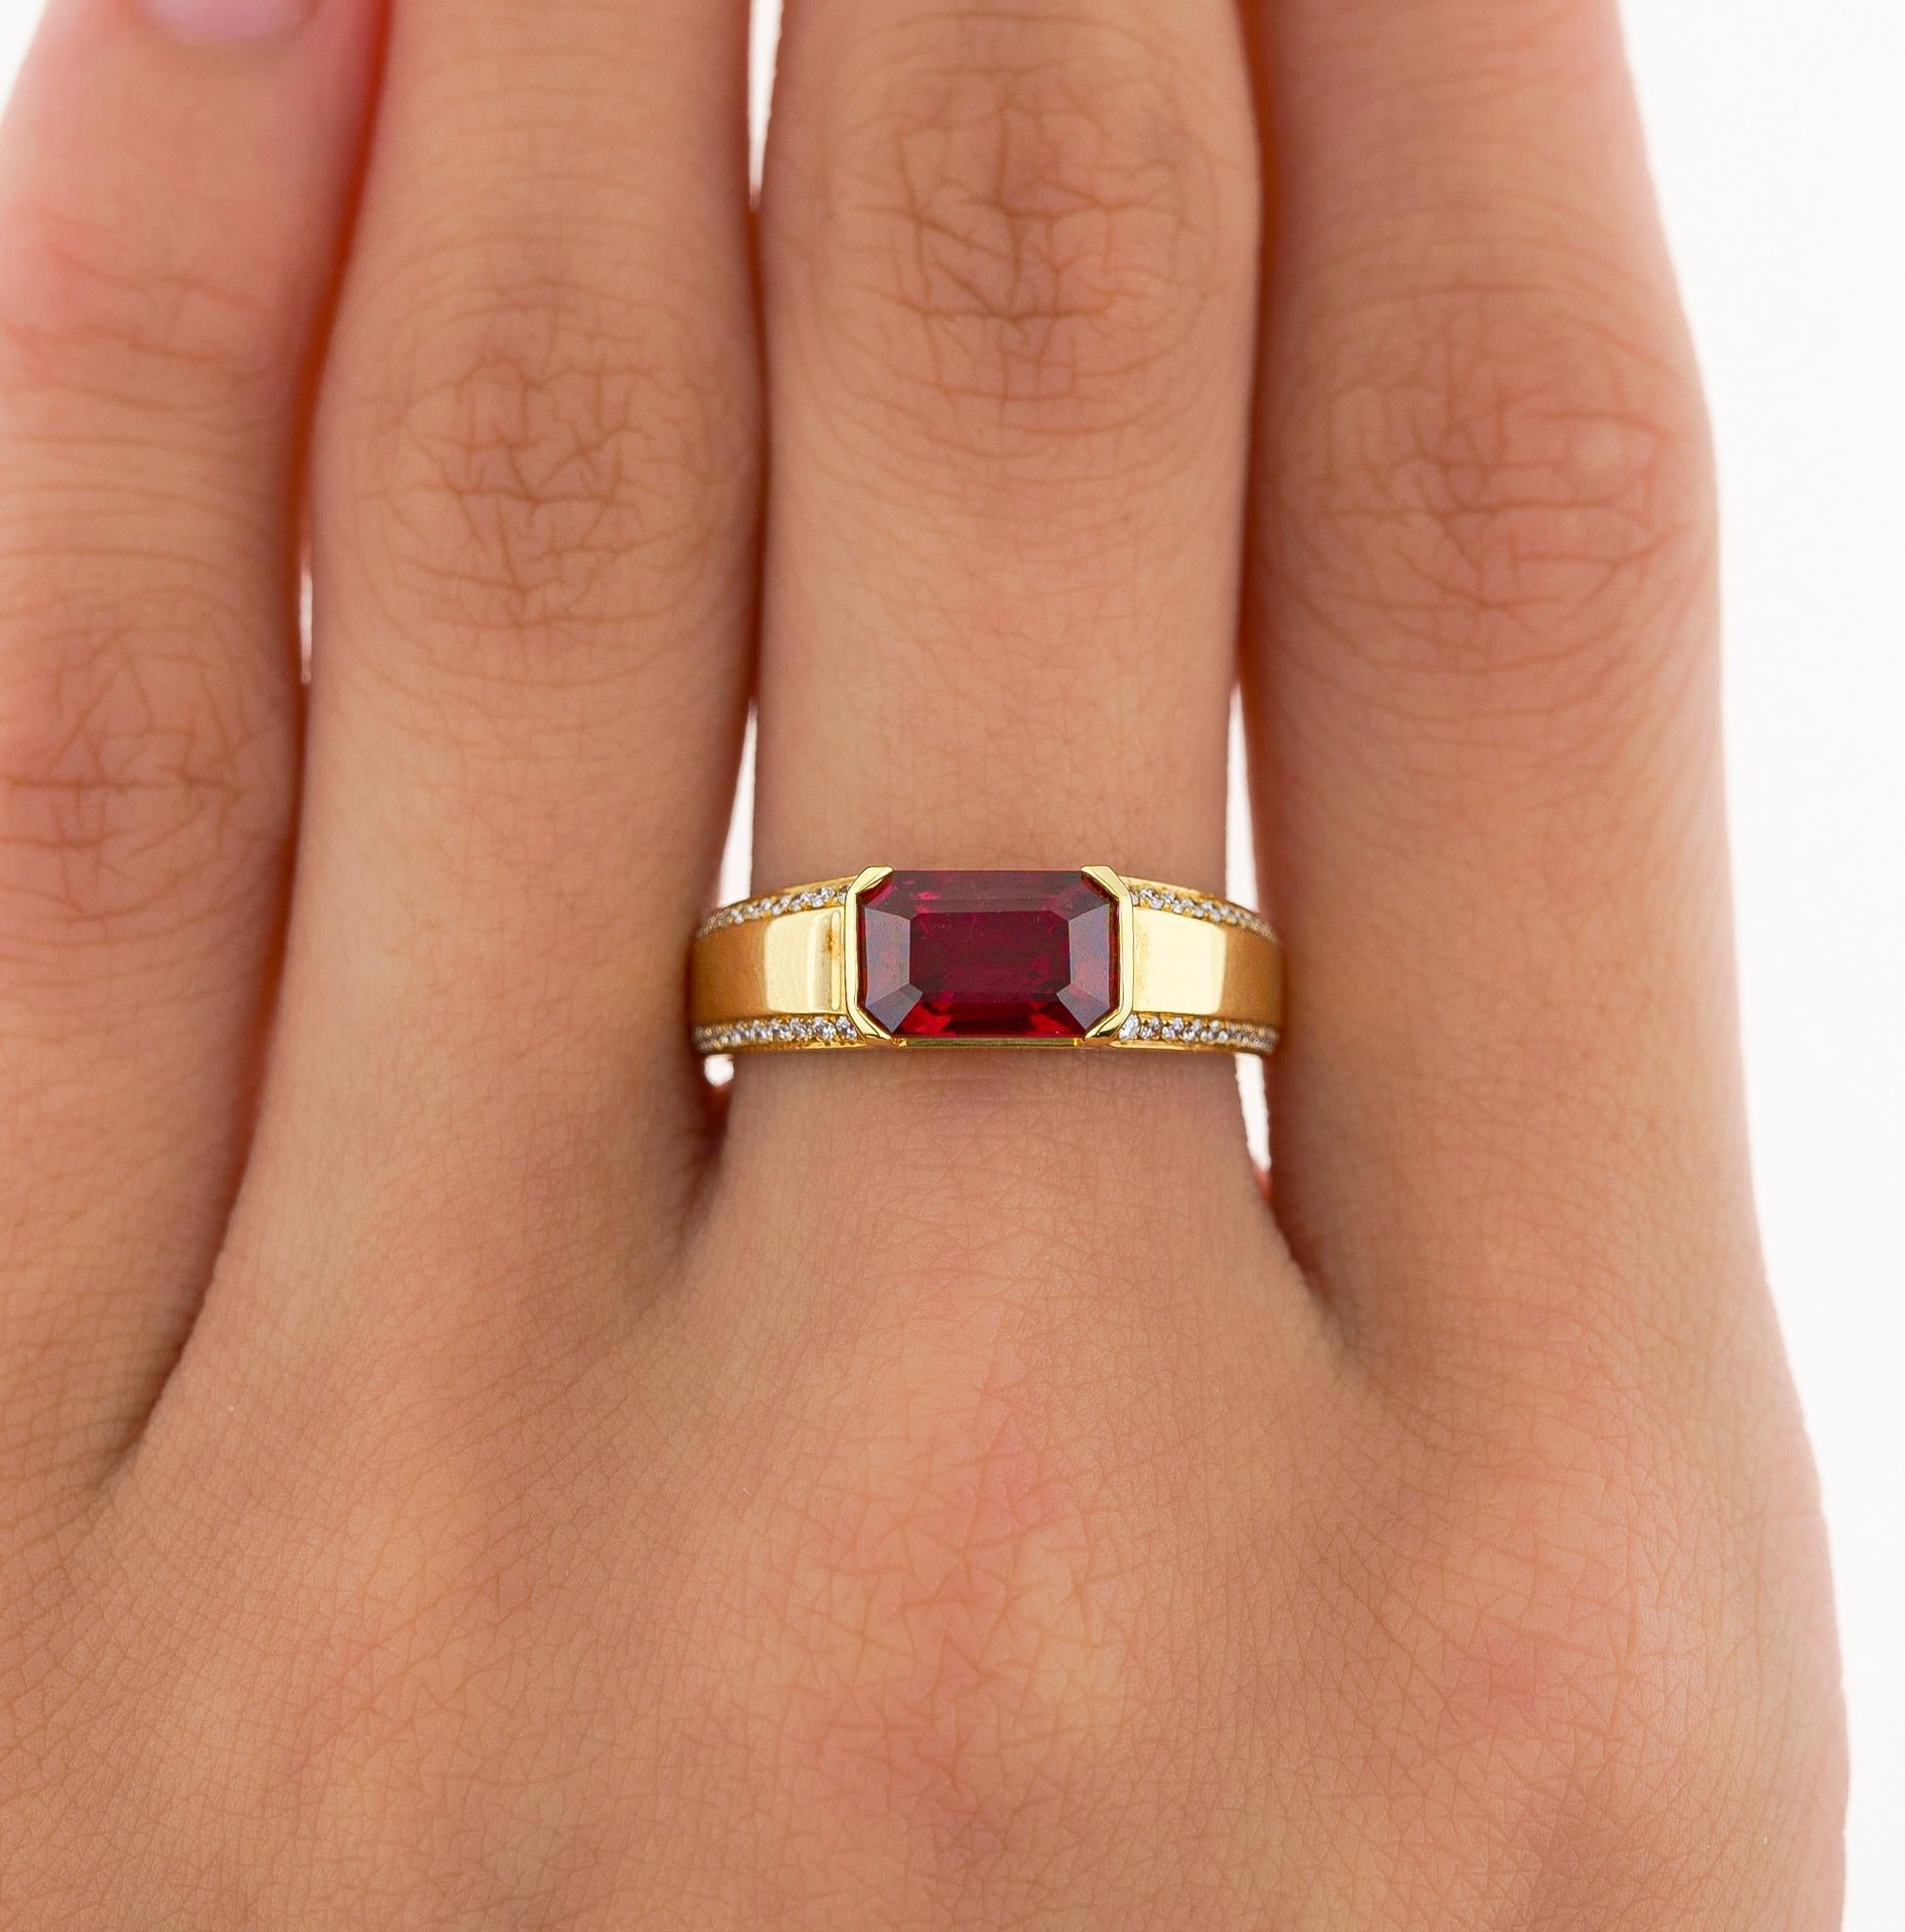 2.09 Carat Vivid Red Pigeon's Blood Burma Ruby Emerald Cut East-West Ring For Sale 4